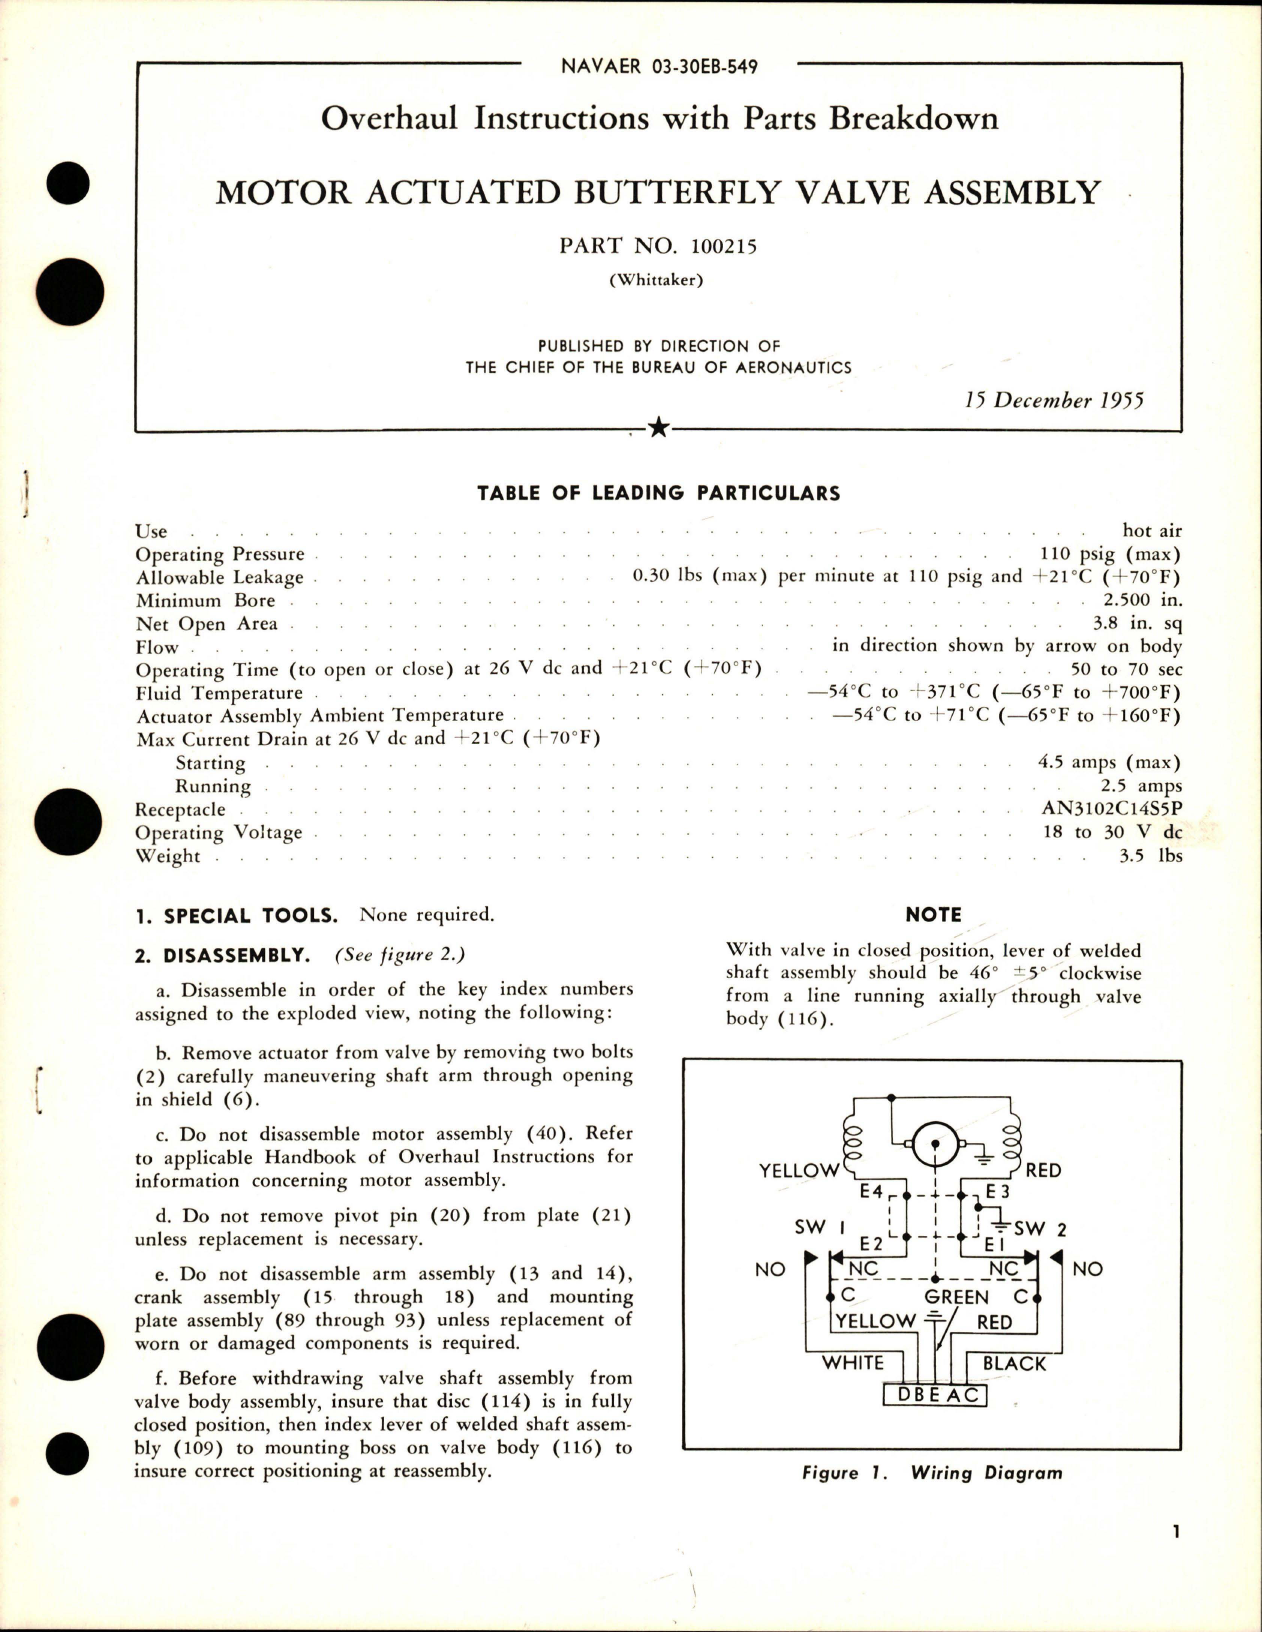 Sample page 1 from AirCorps Library document: Overhaul Instructions with Parts for Motor Actuated Butterfly Valve Assembly - Part 100215